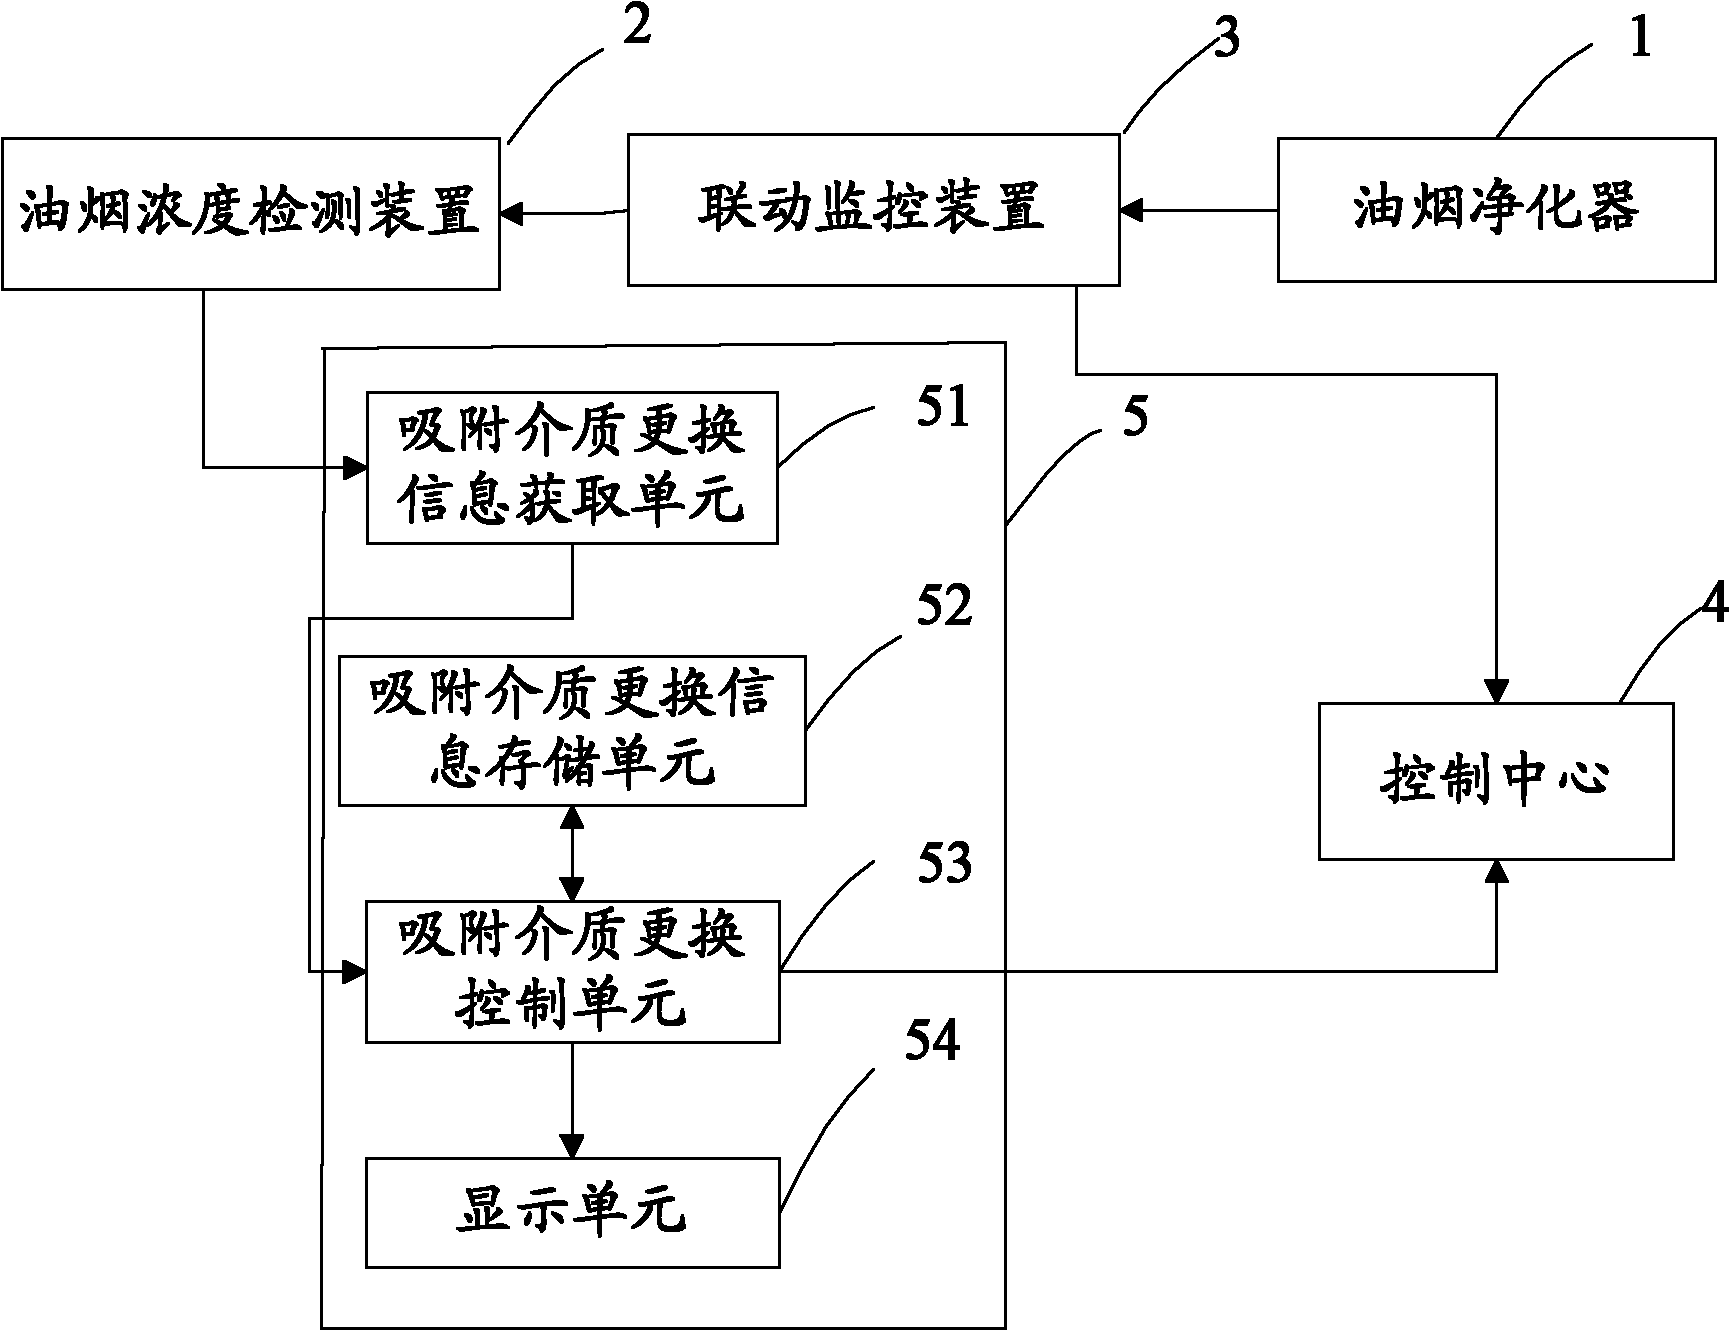 Control system for lampblack concentration detecting device